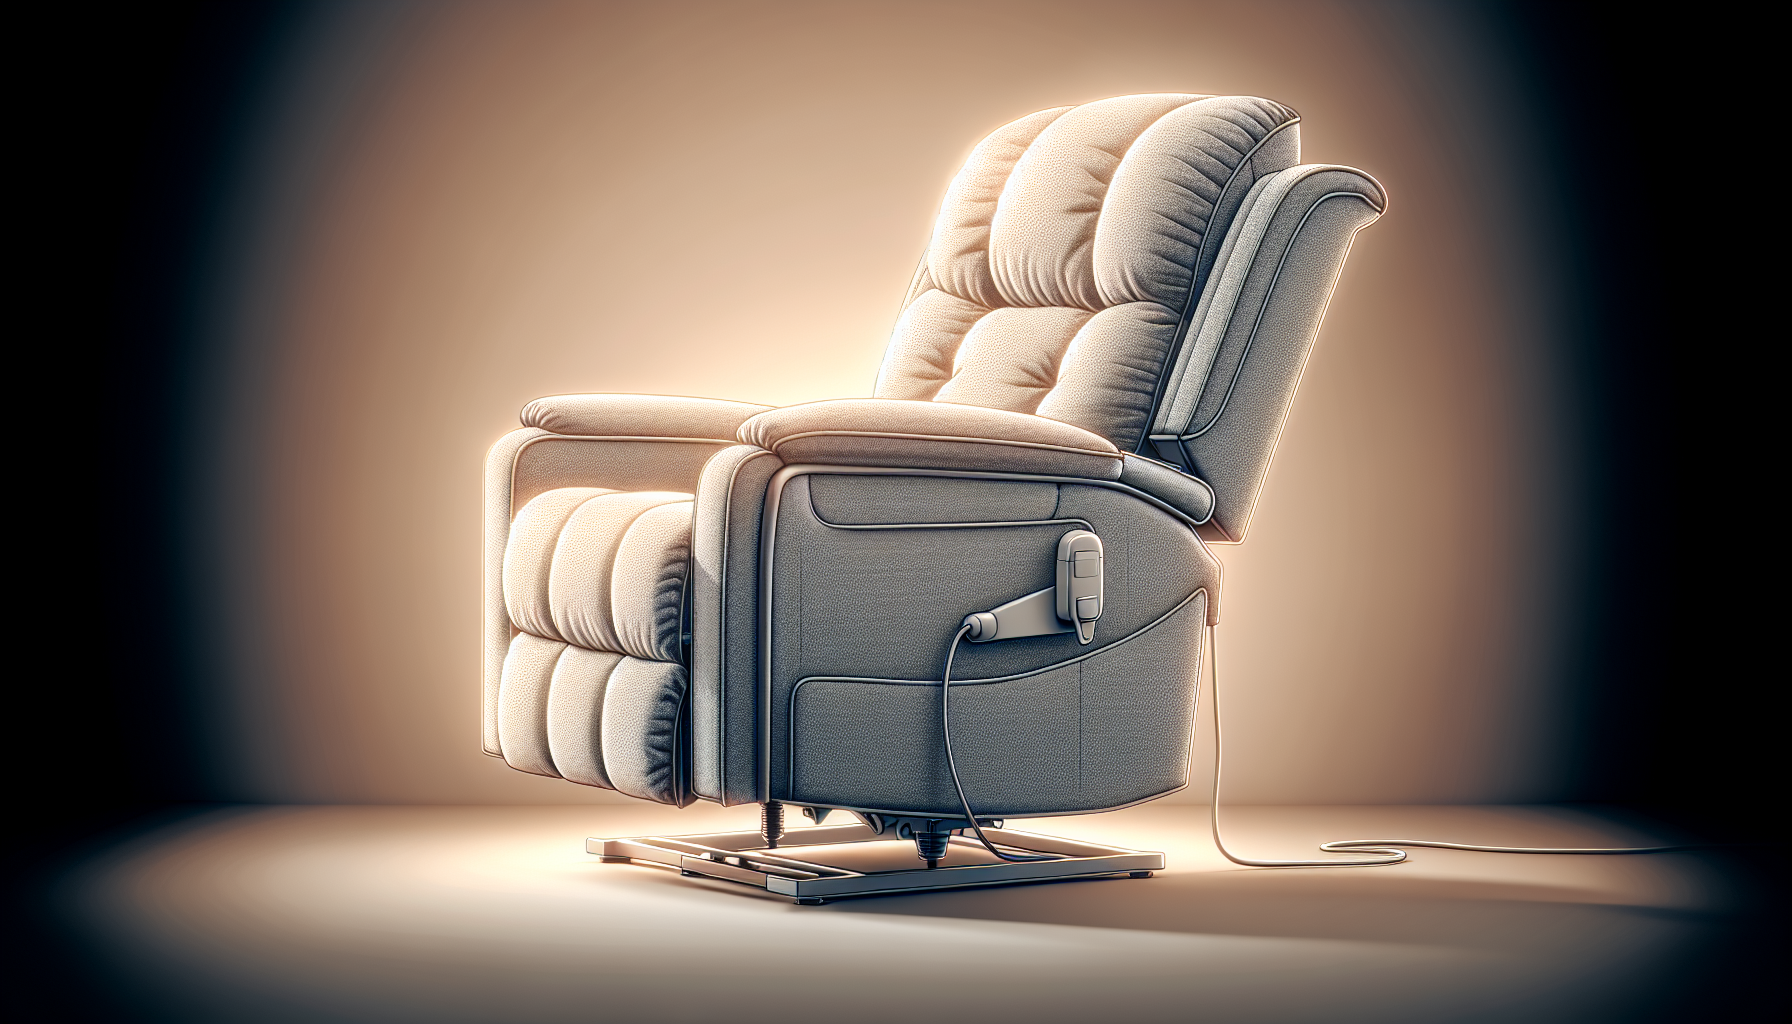 Maximize Comfort with the Grey Power Lift Recliner Chair